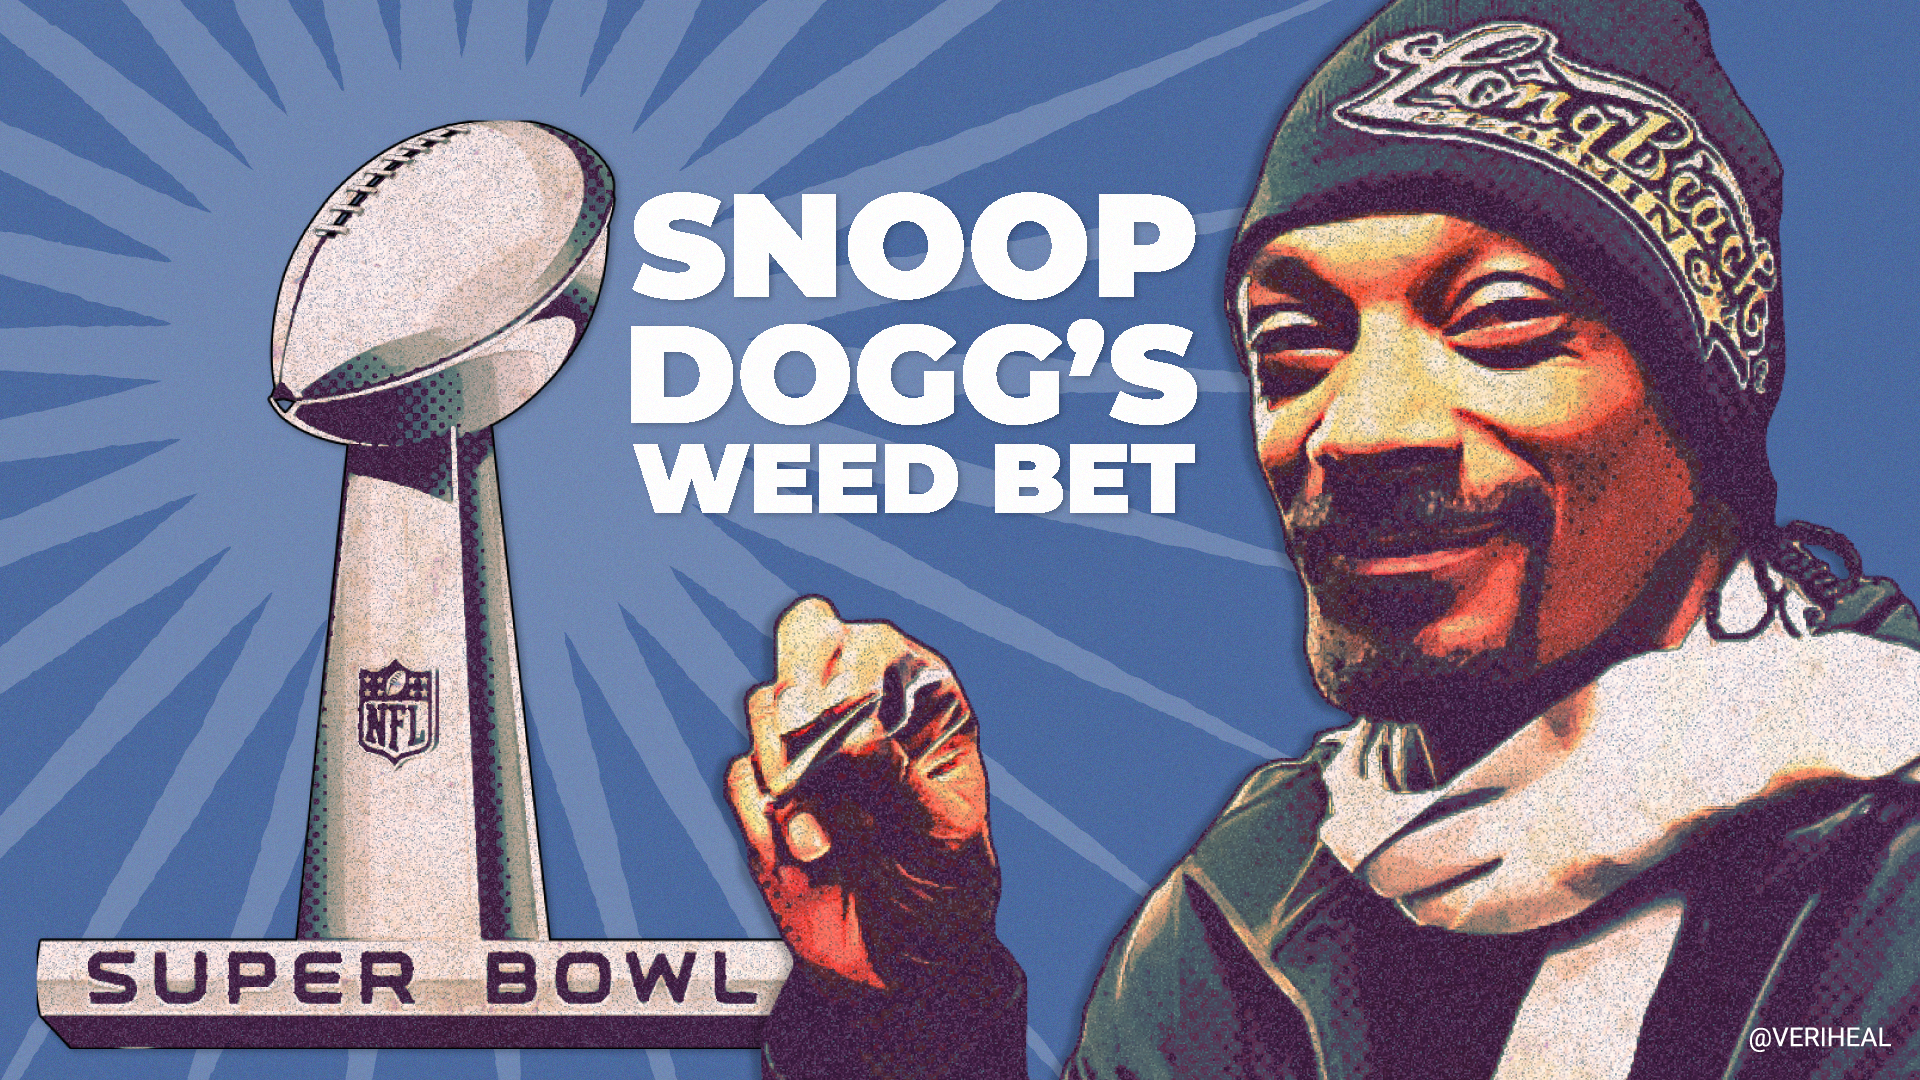 Super Bowl Viewers Bet on Snoop Dogg’s Halftime Show Performance